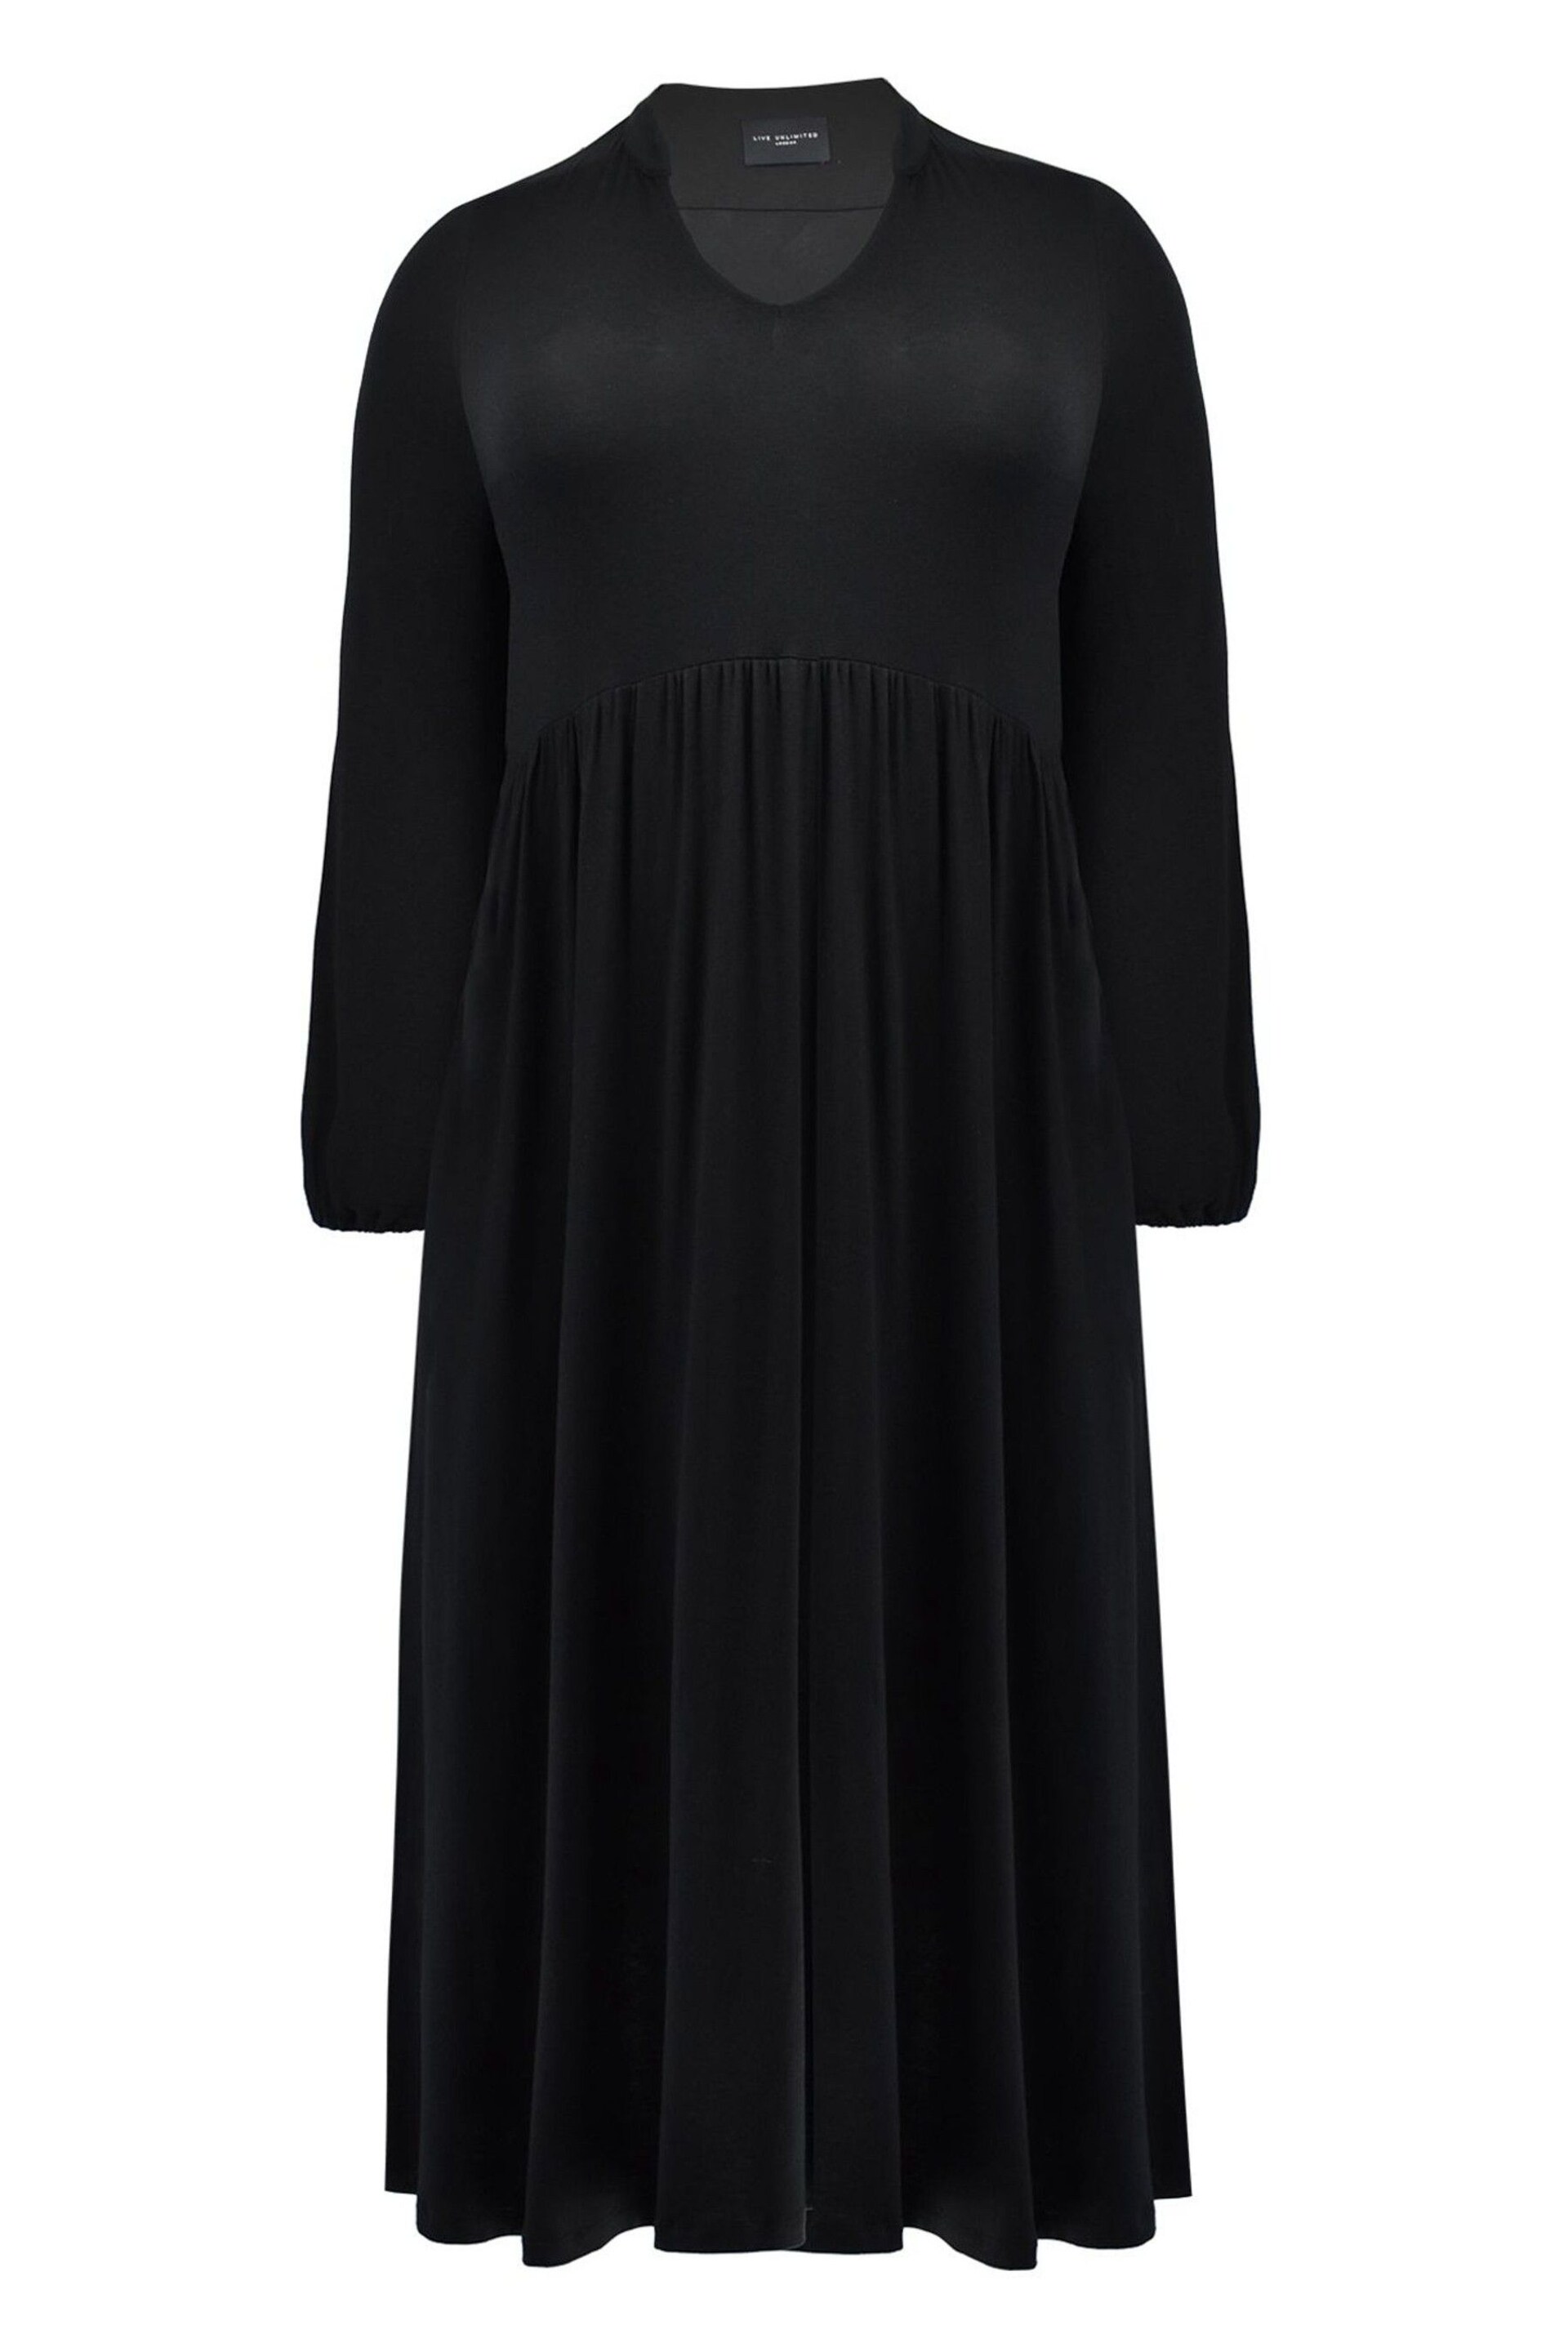 Live Unlimited Petite Curve Jersey Nehru Collar Relaxed Black Dress - Image 5 of 5